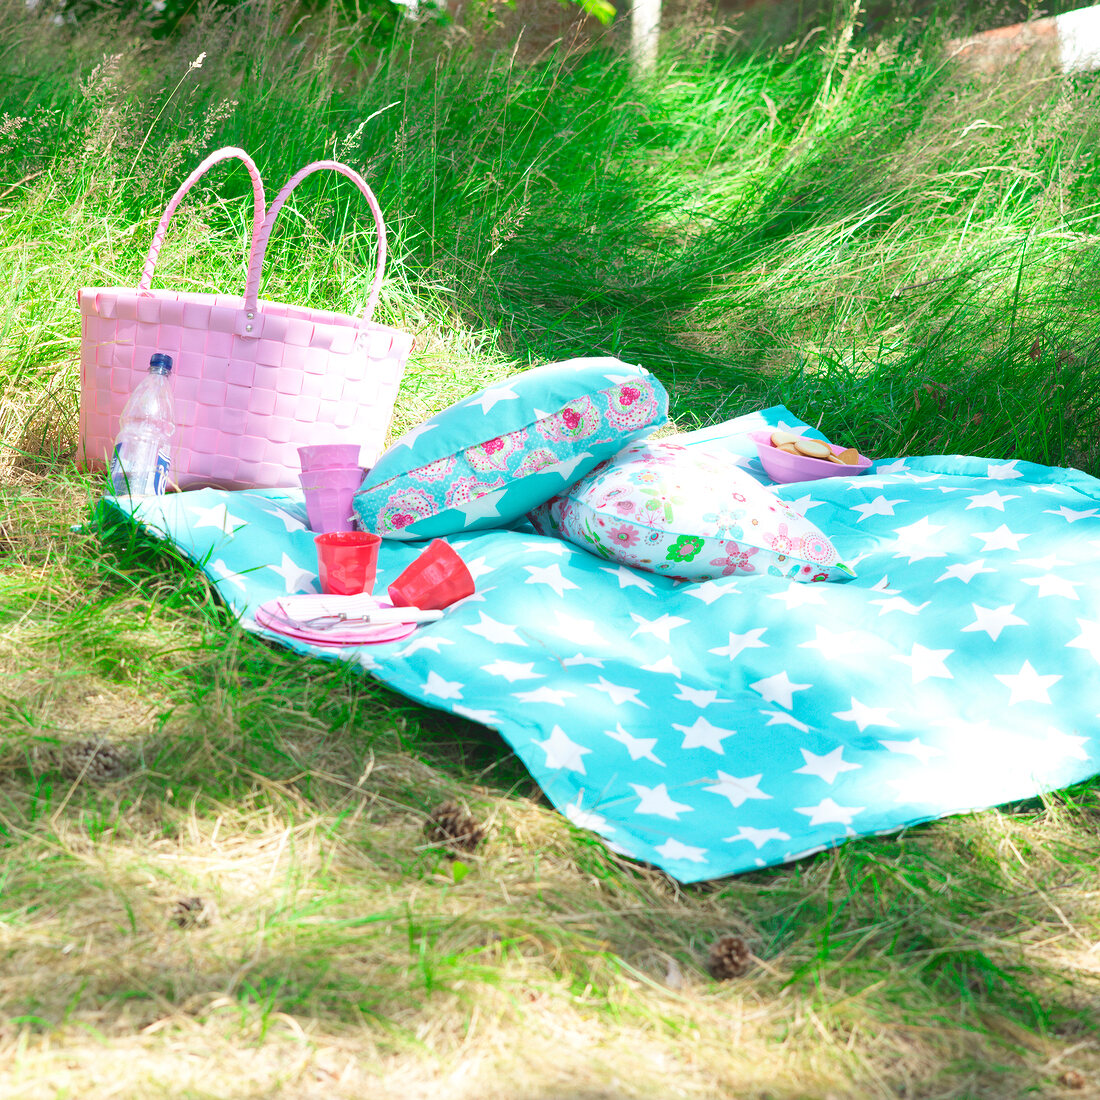 Colourful cushions and blanket with pink wicker basket in garden